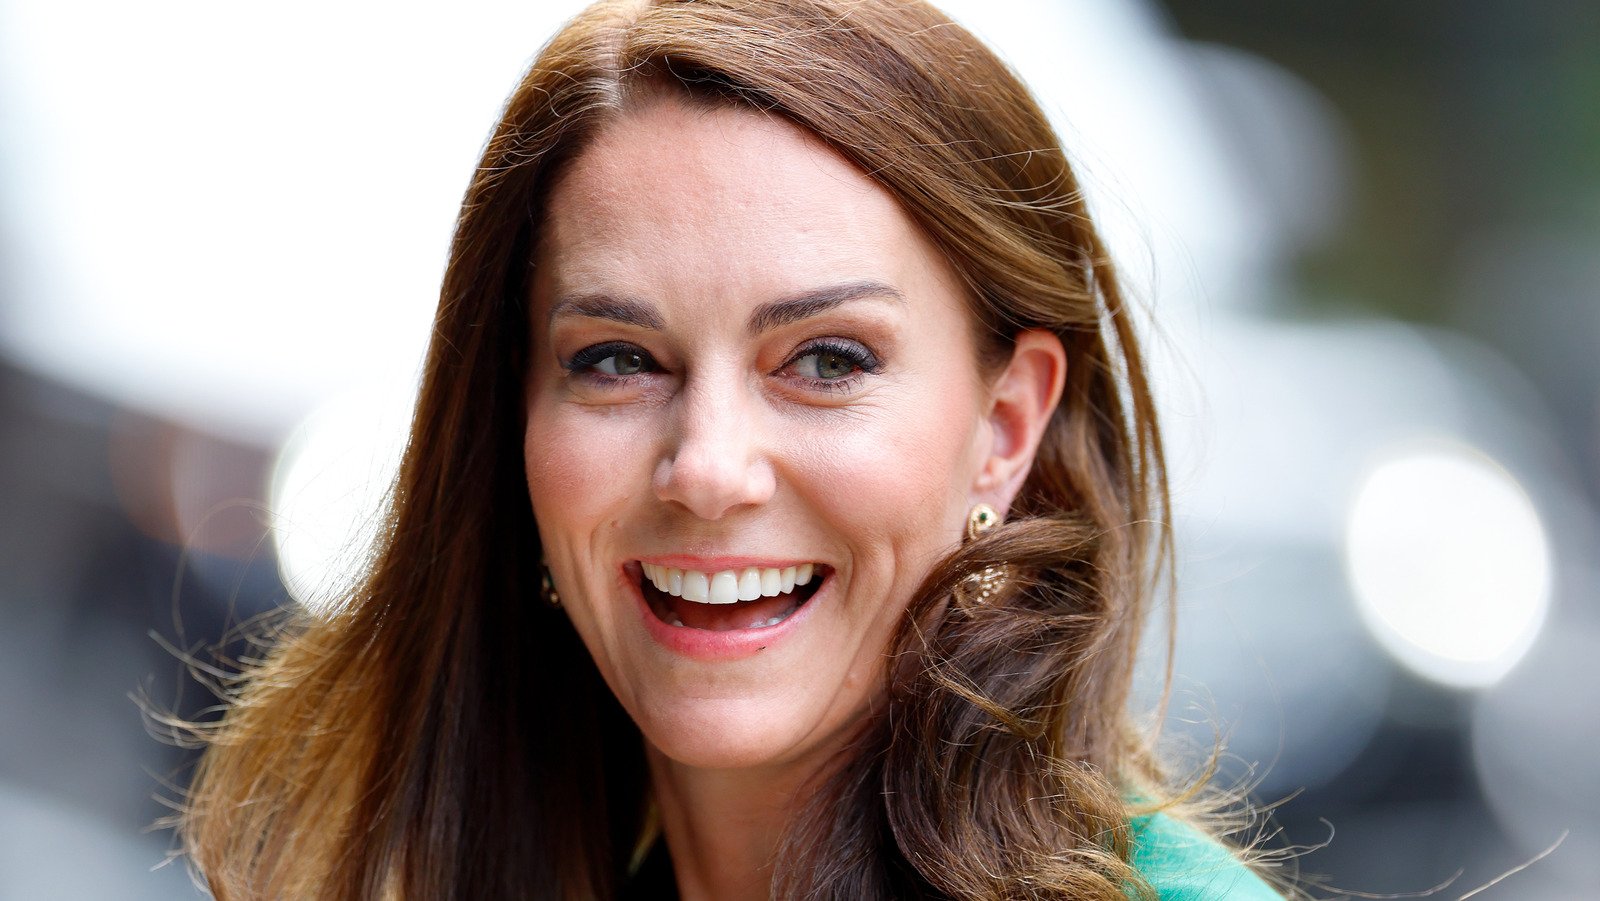 All Of The Connections Kate Middleton's Family Had To The Royal Family Before Her Marriage - The List